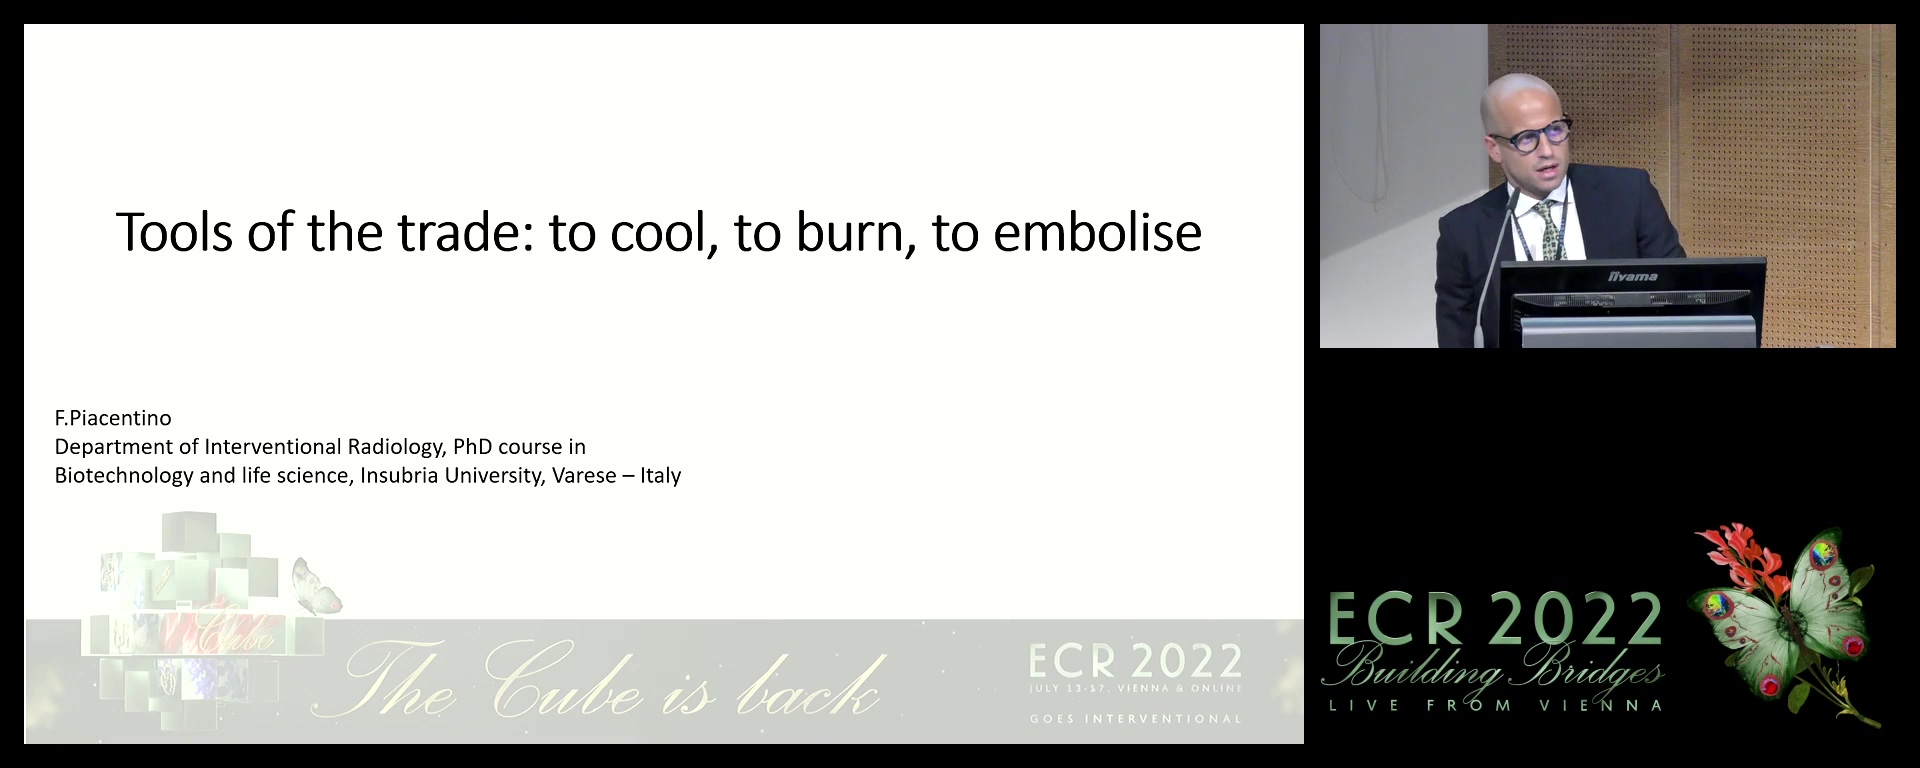 To cool, to burn, to embolise